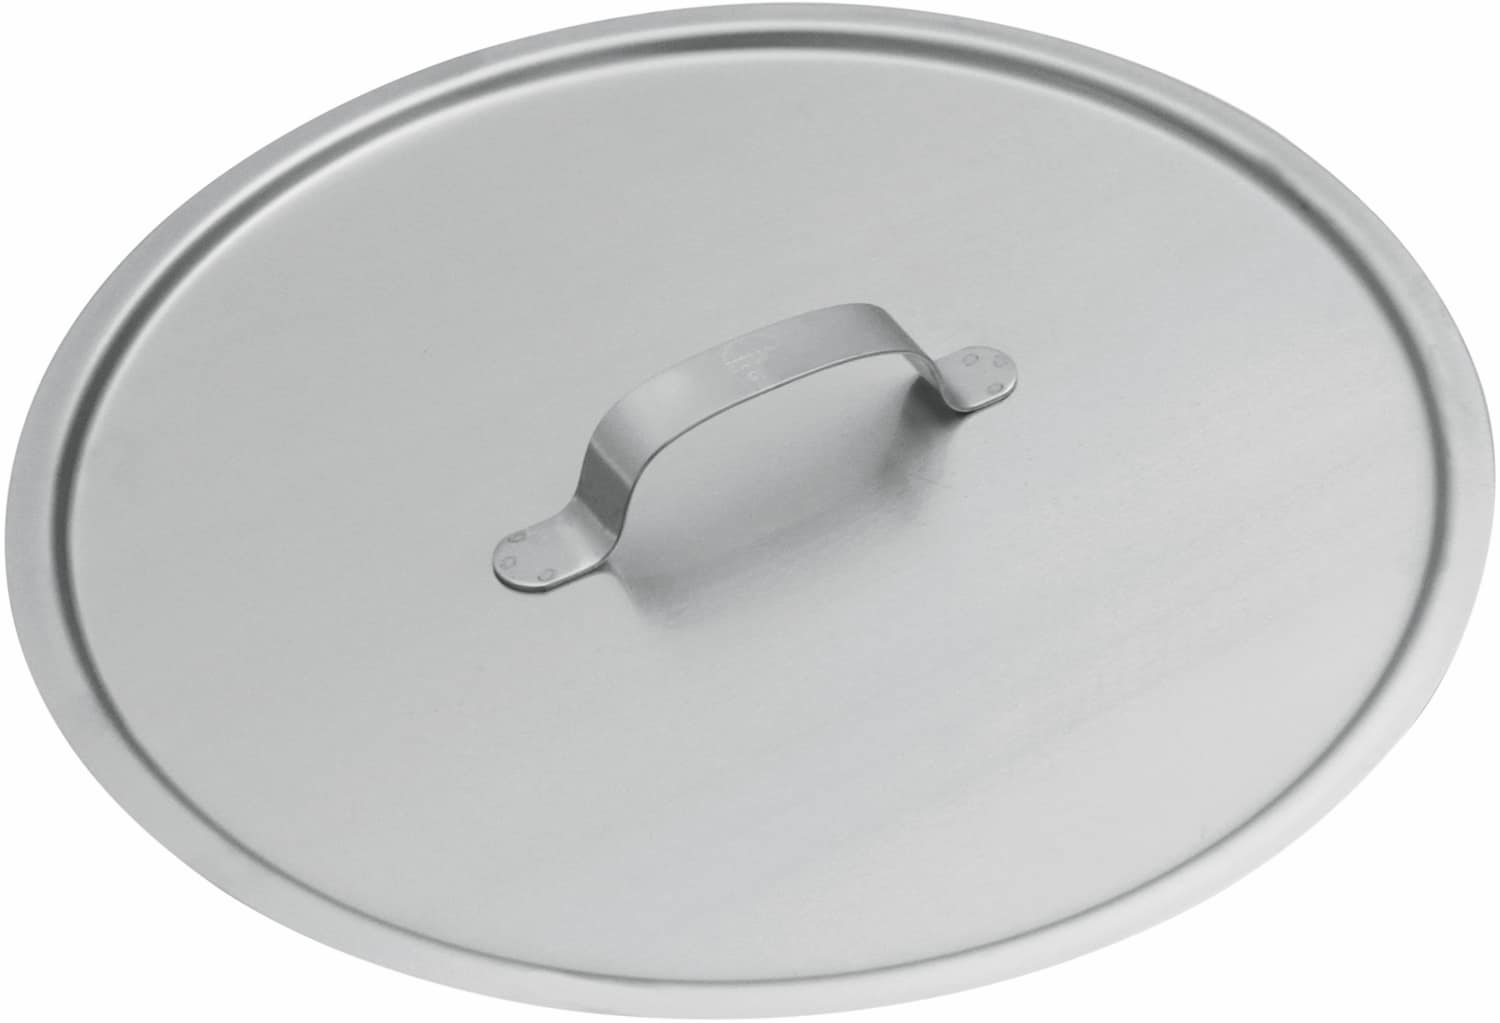 Lids for buckets made of stainless steel